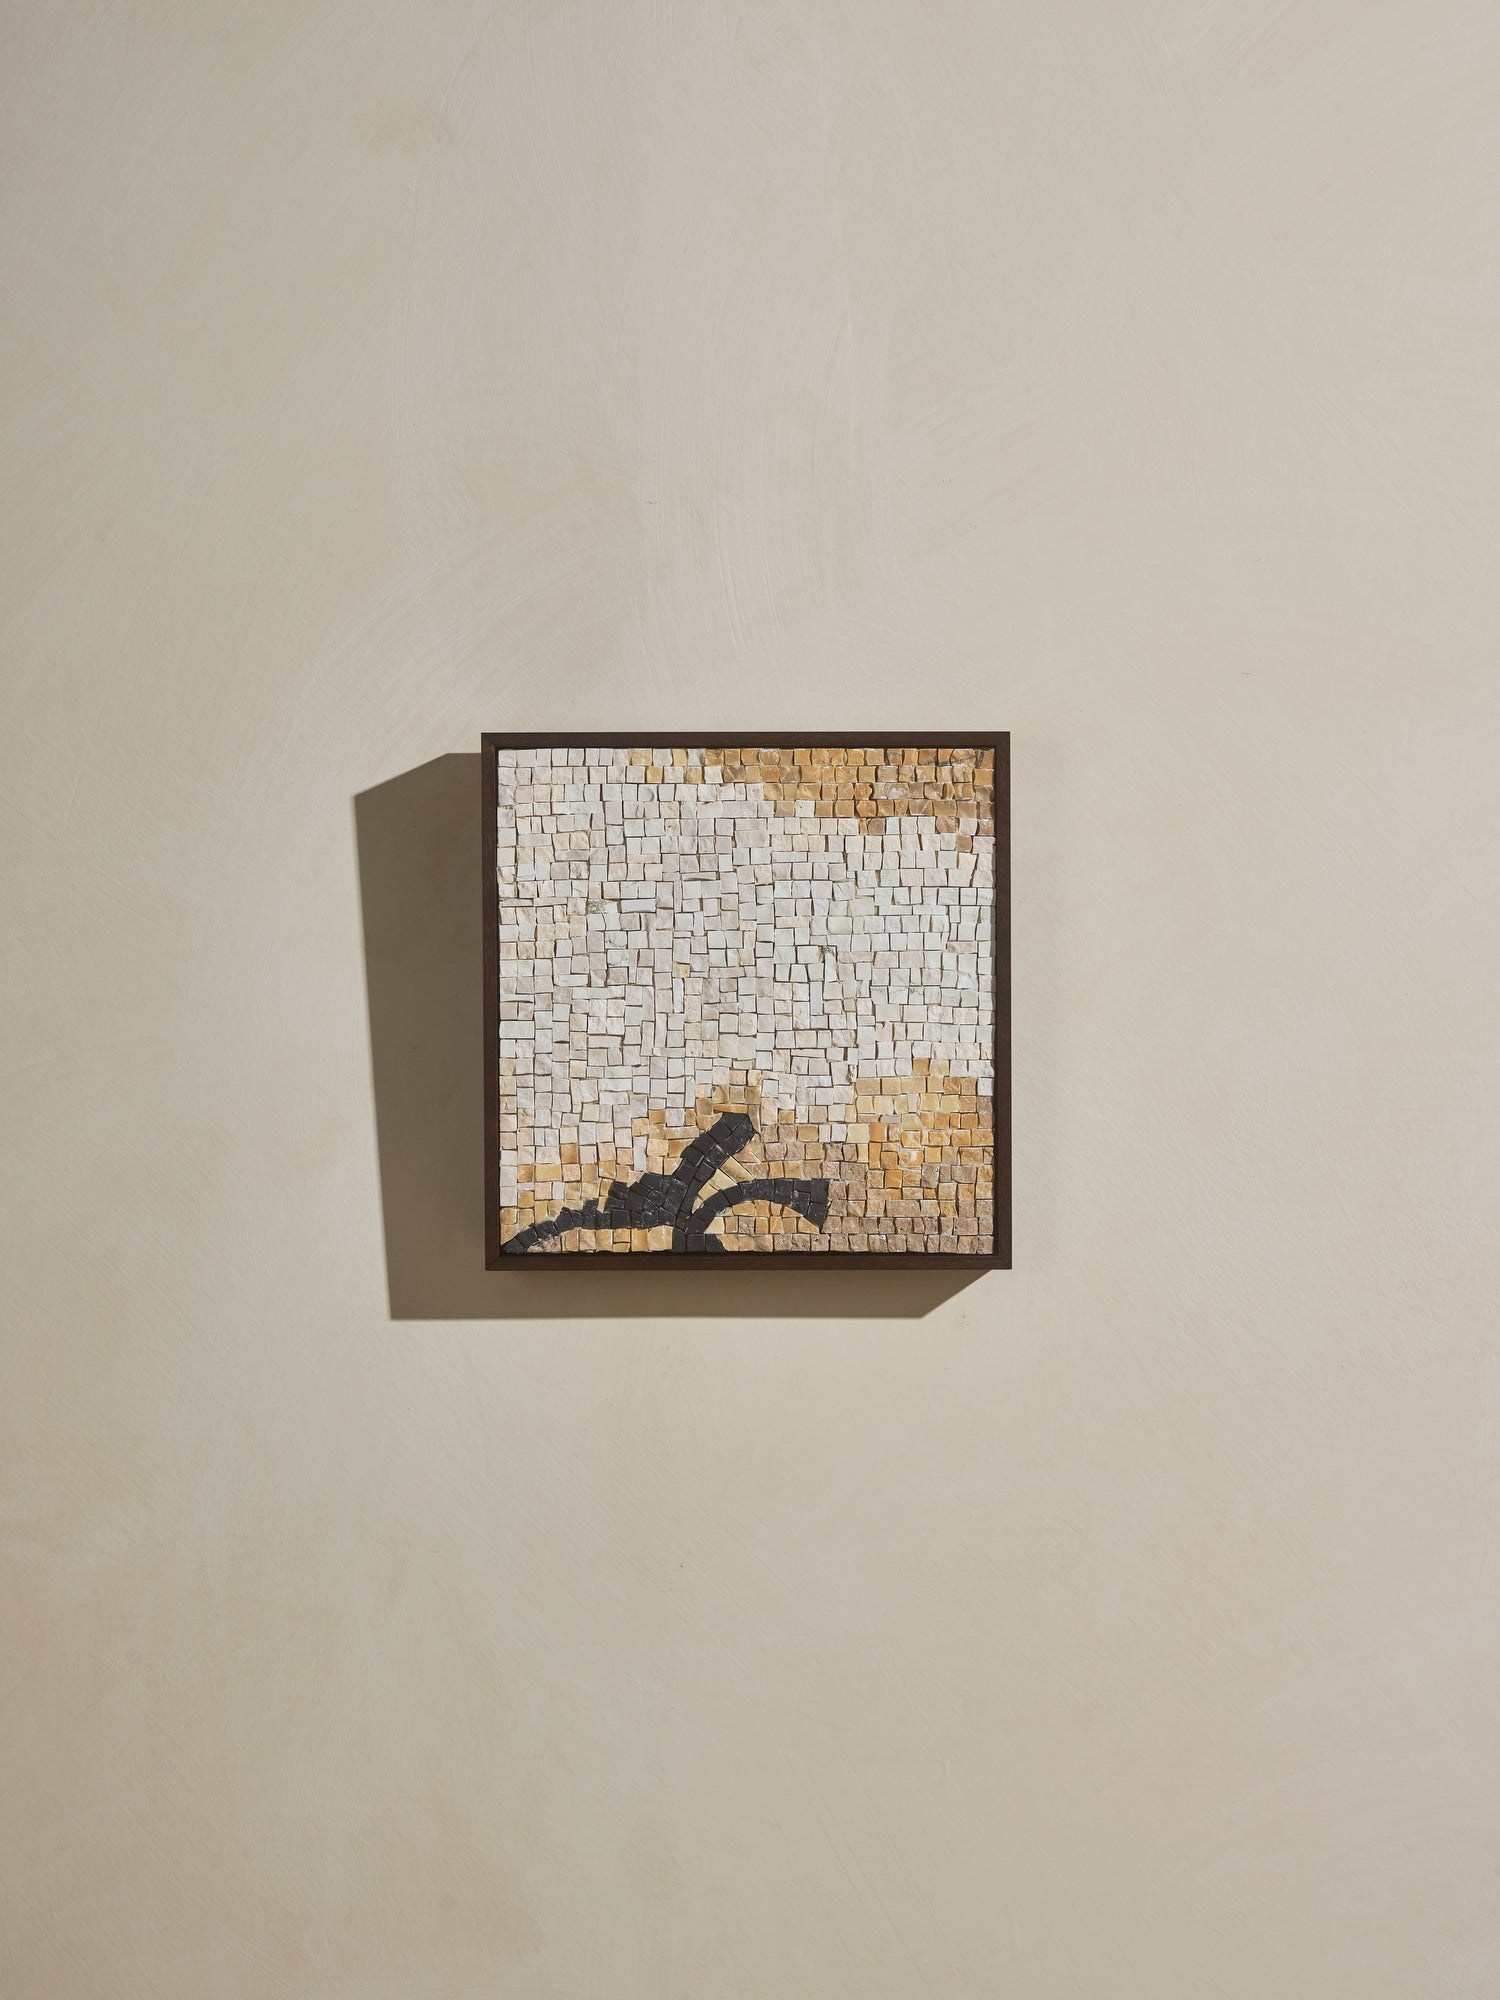 Mosaic square stone art piece with yellow, off white and black details and wooden framing.